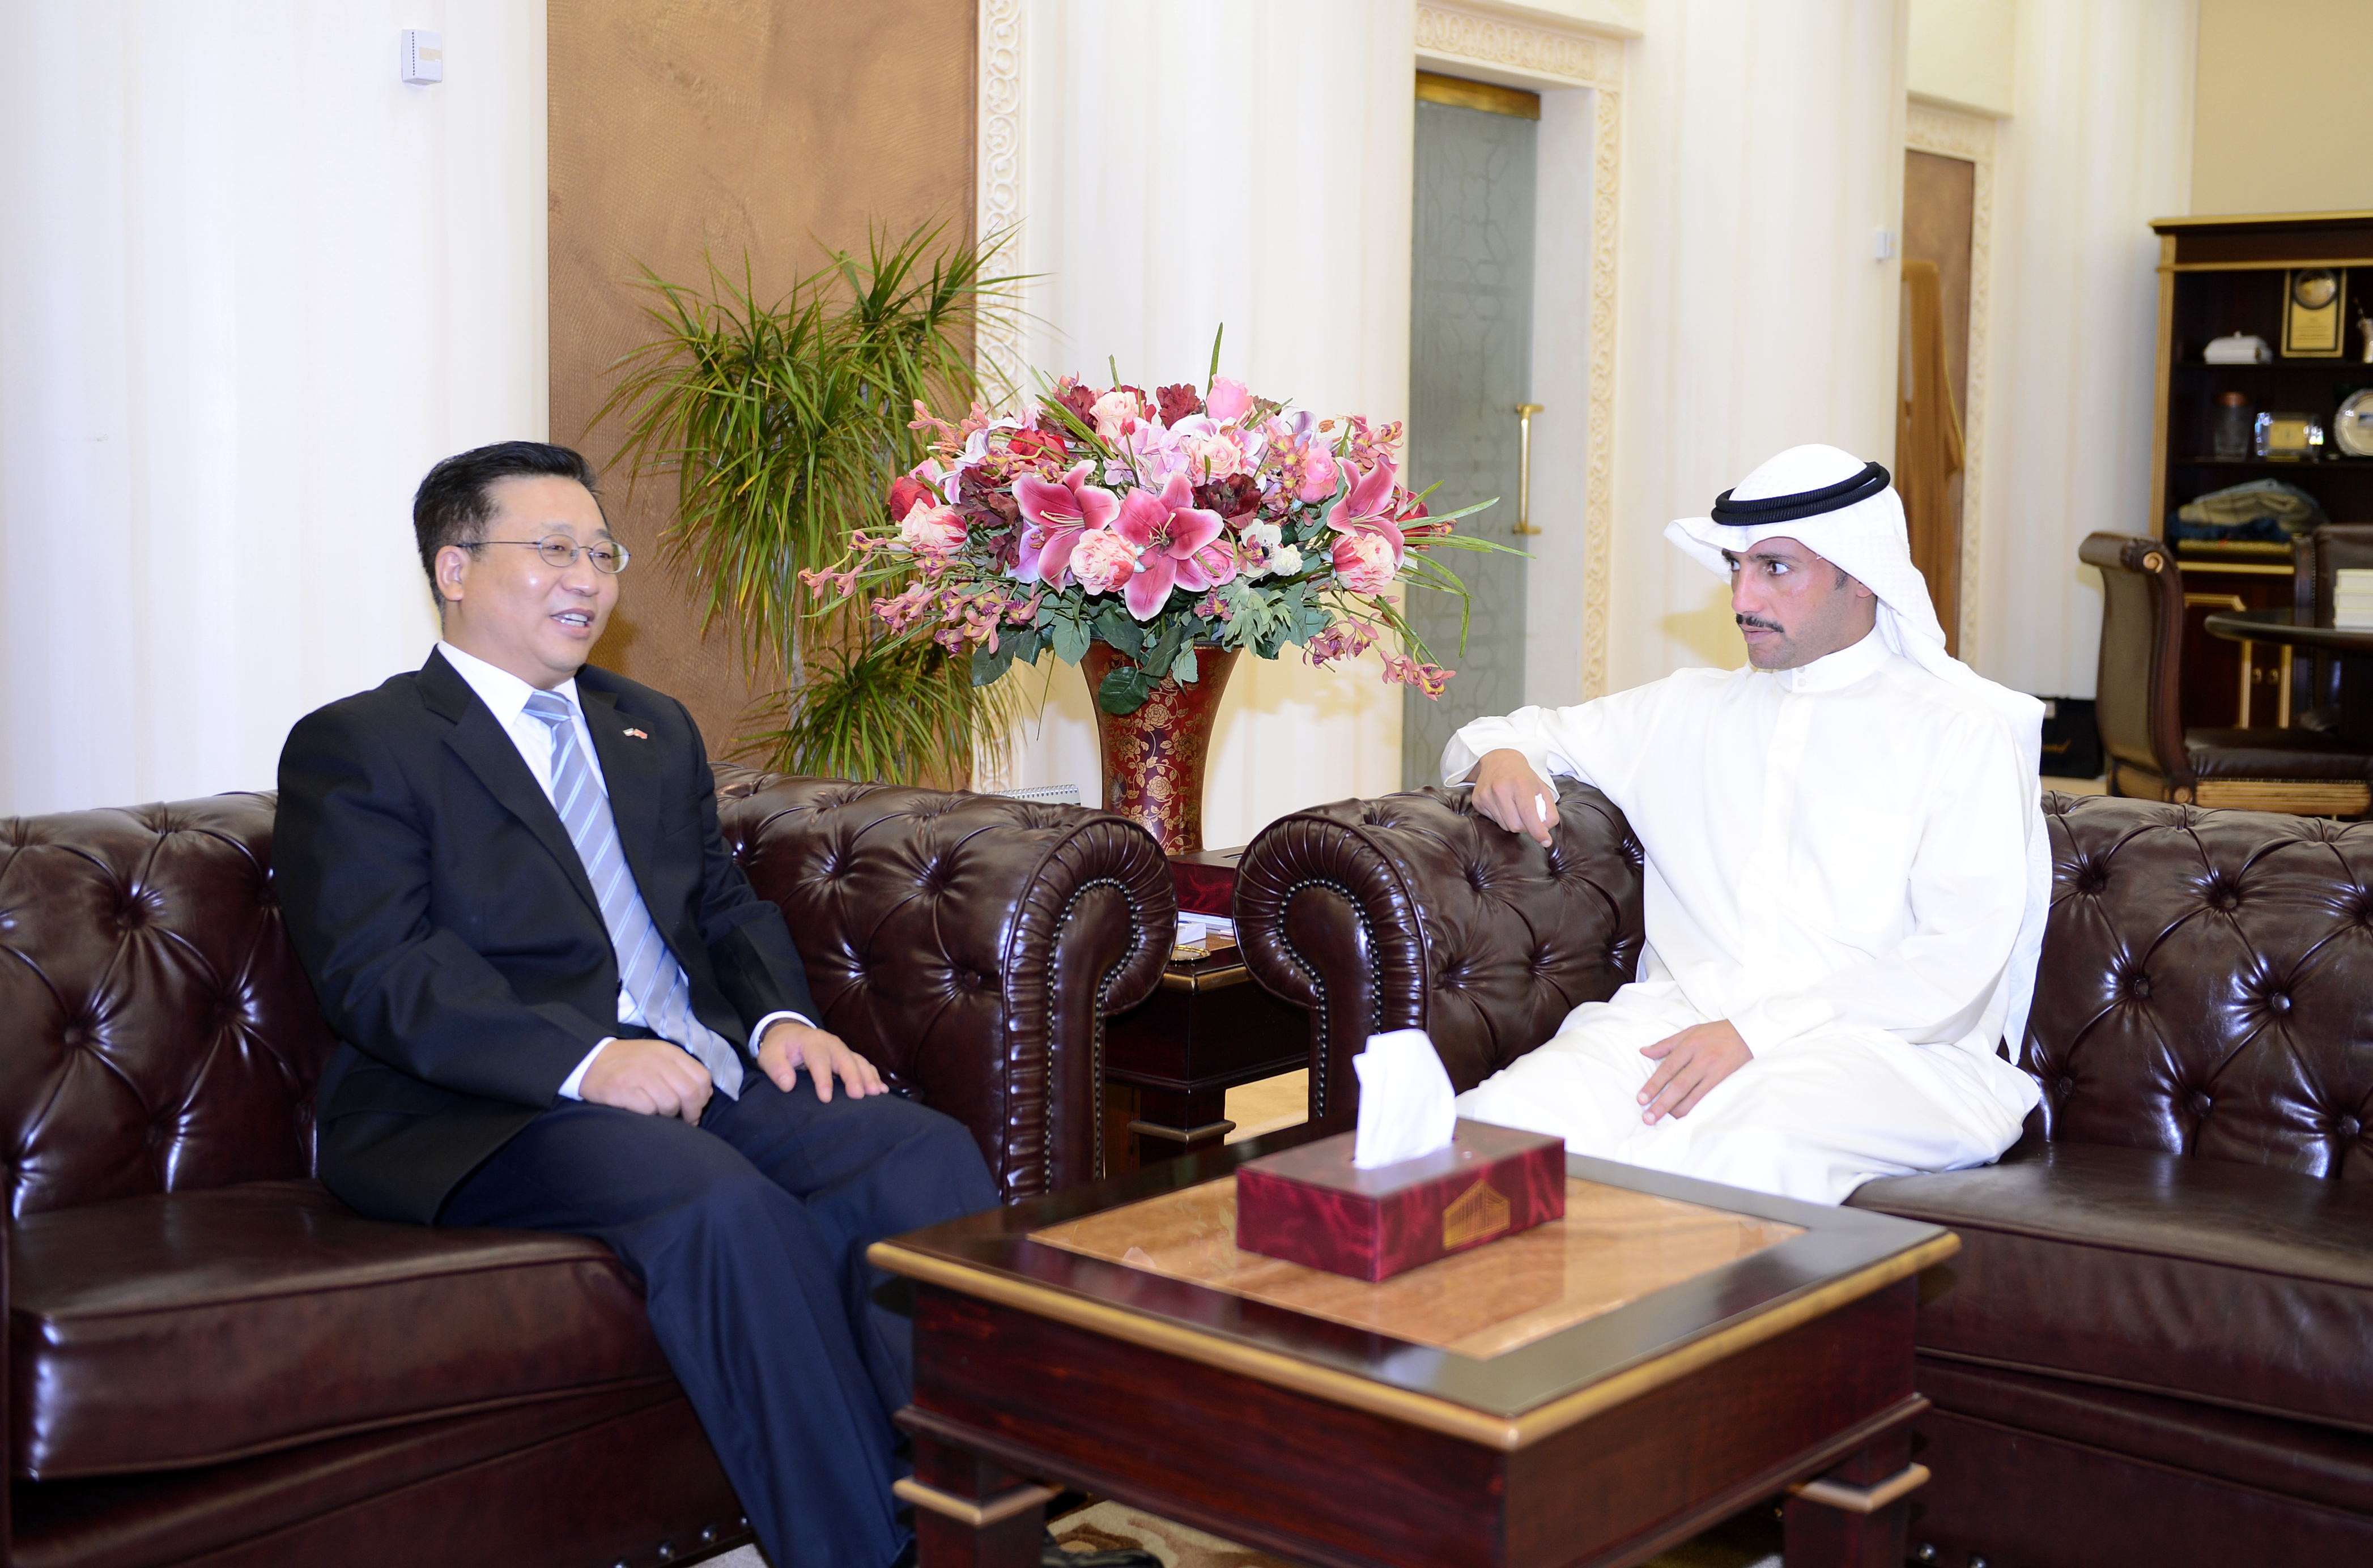 National Assembly Speaker Marzouq Al-Ghanim receives Ambassador of China in Kuwait Cui Jianchun